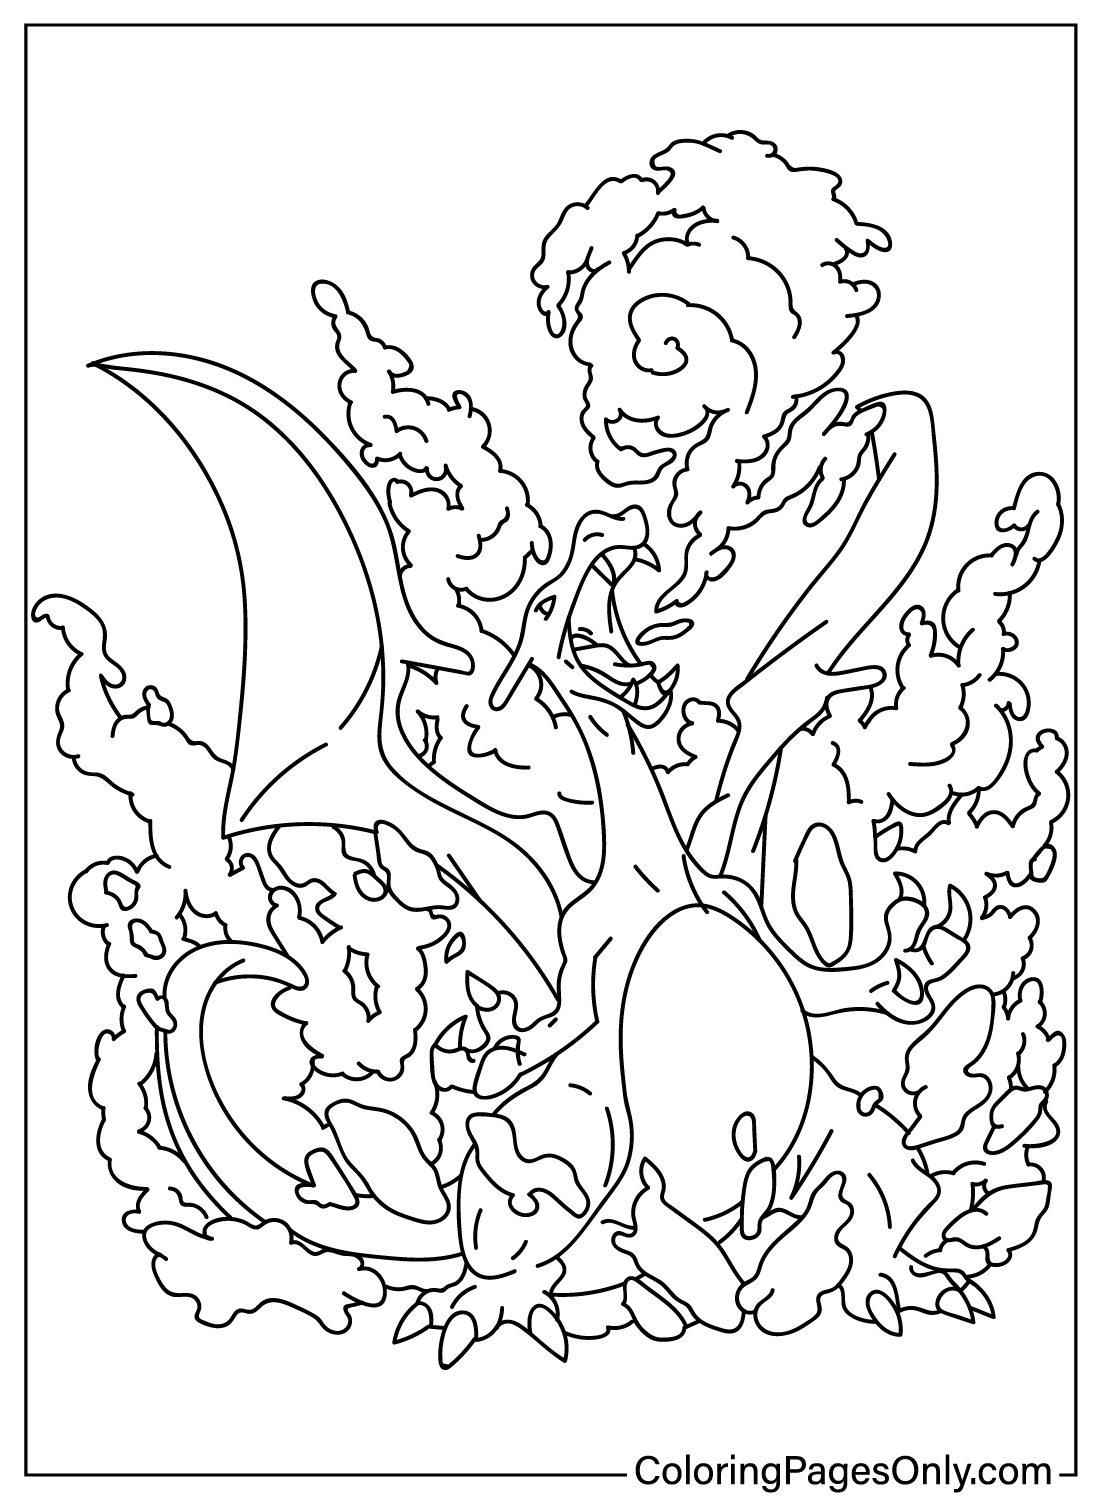 Coloring pages only on x ððdive into the fiery world of unique charizard coloring pages ððð httpstcoemzizpxuws charizard pokemon coloringpagesonly coloringpages coloringbook art fanart sketch drawing draw coloring usa trend